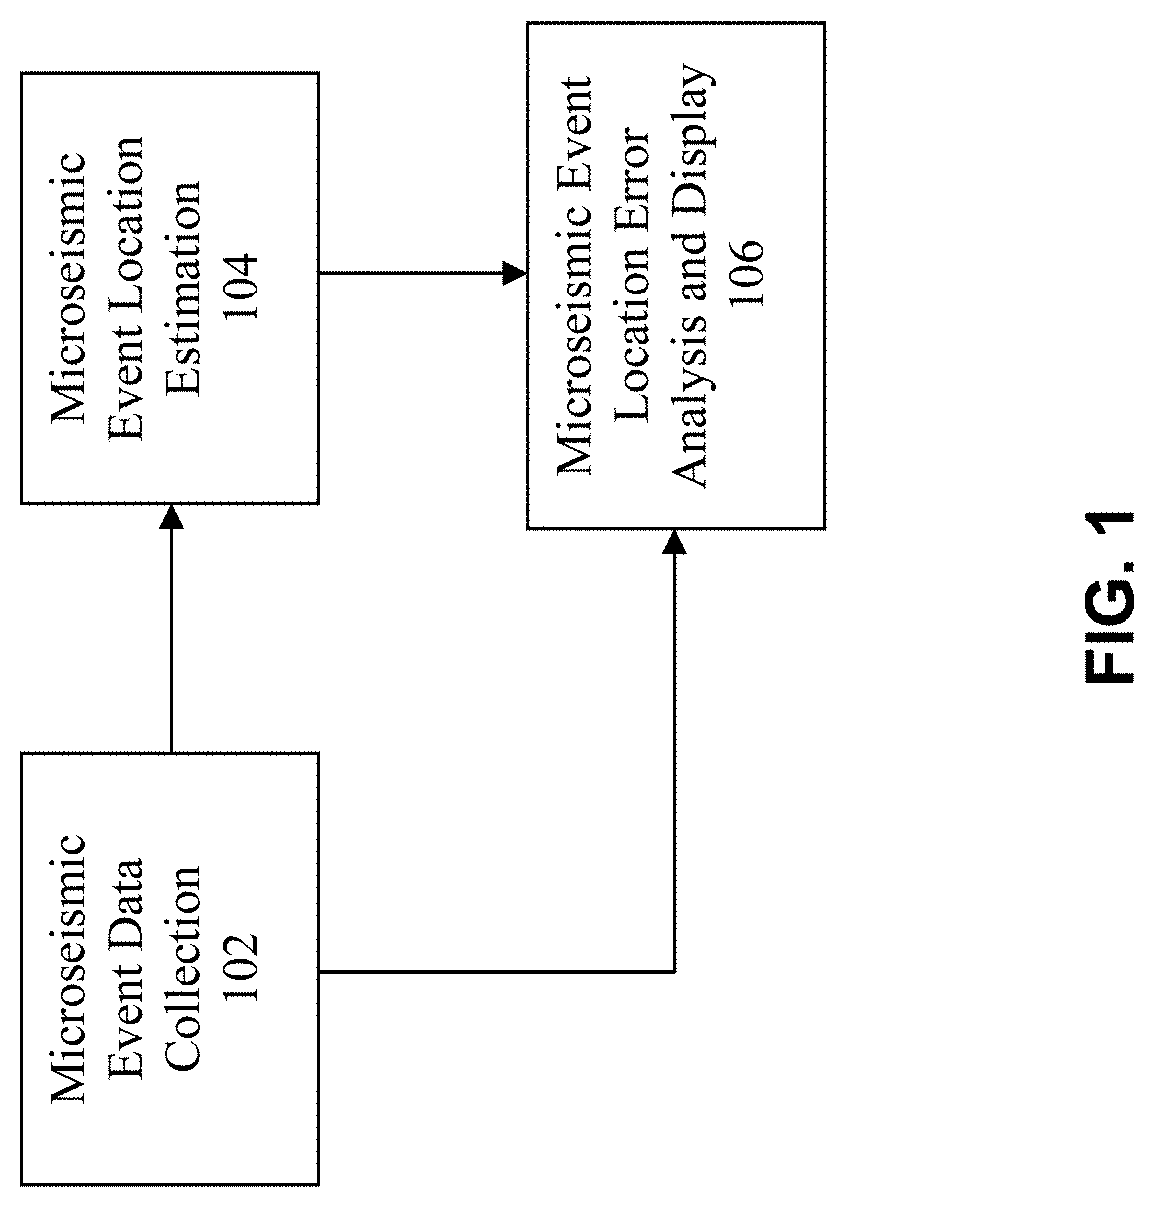 Method and system for microseismic event location error analysis and display